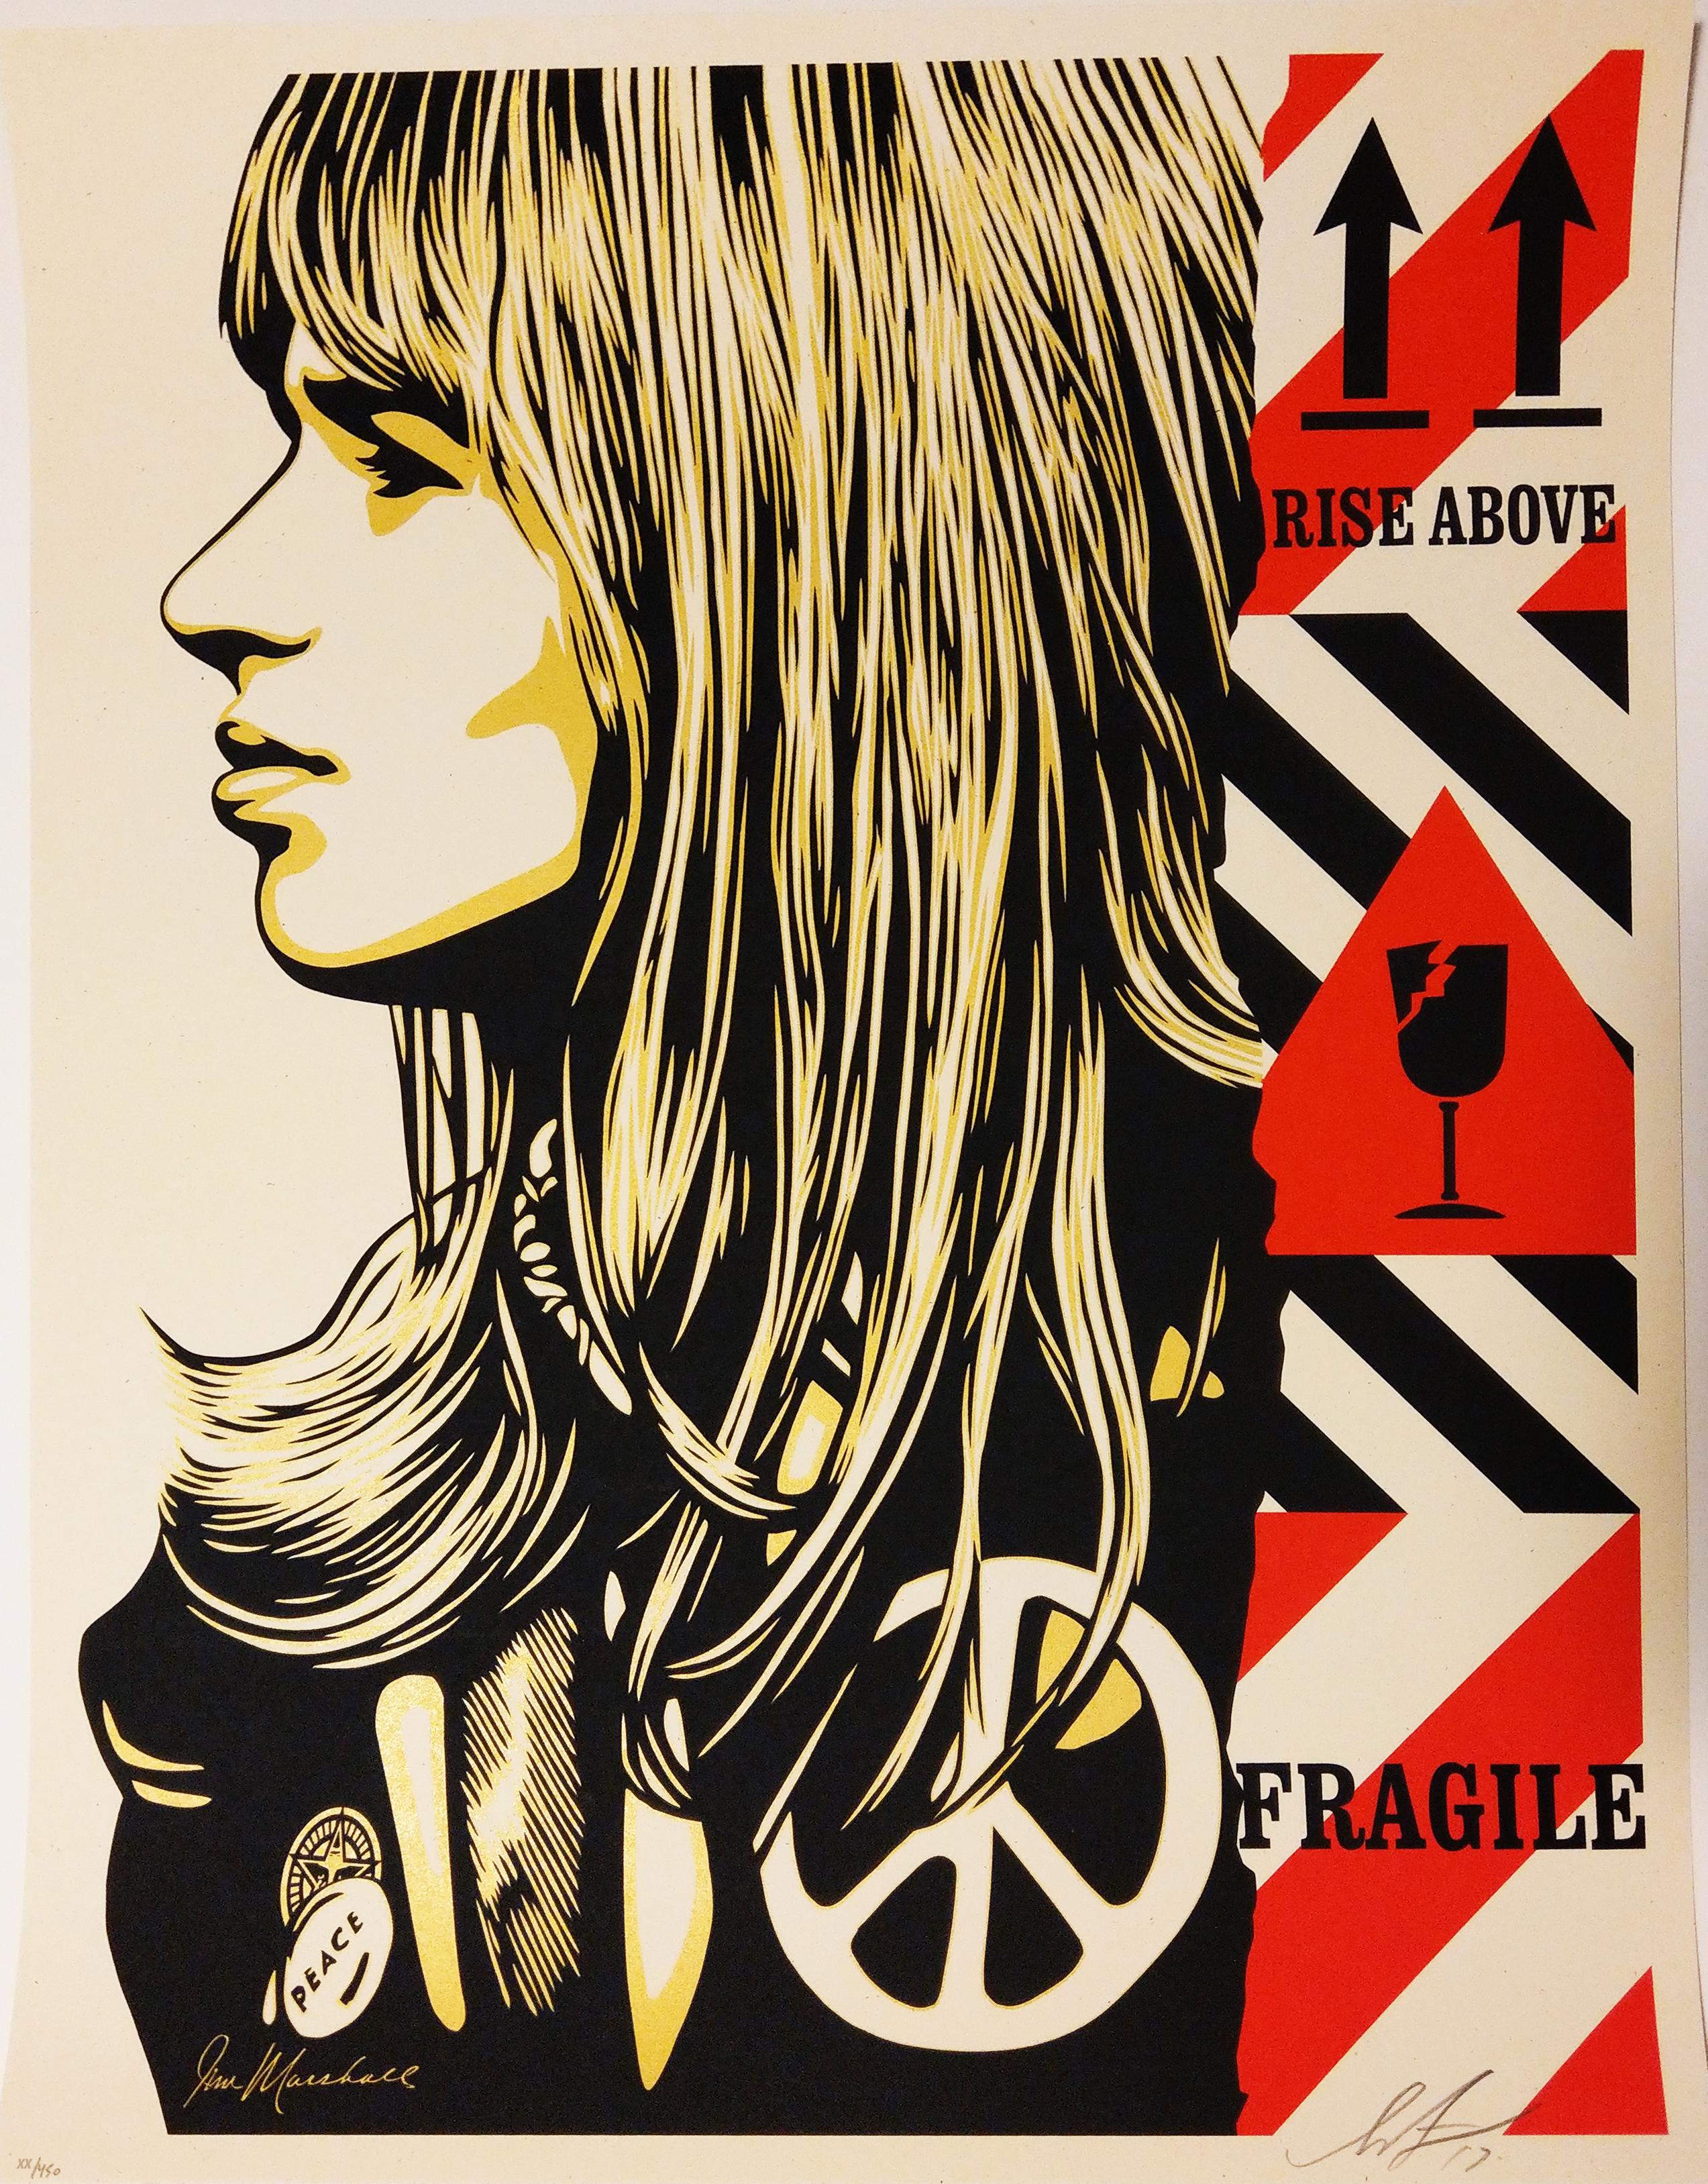 Fragile Peace - Shepard Fairey Obey Giant Contemporary Print